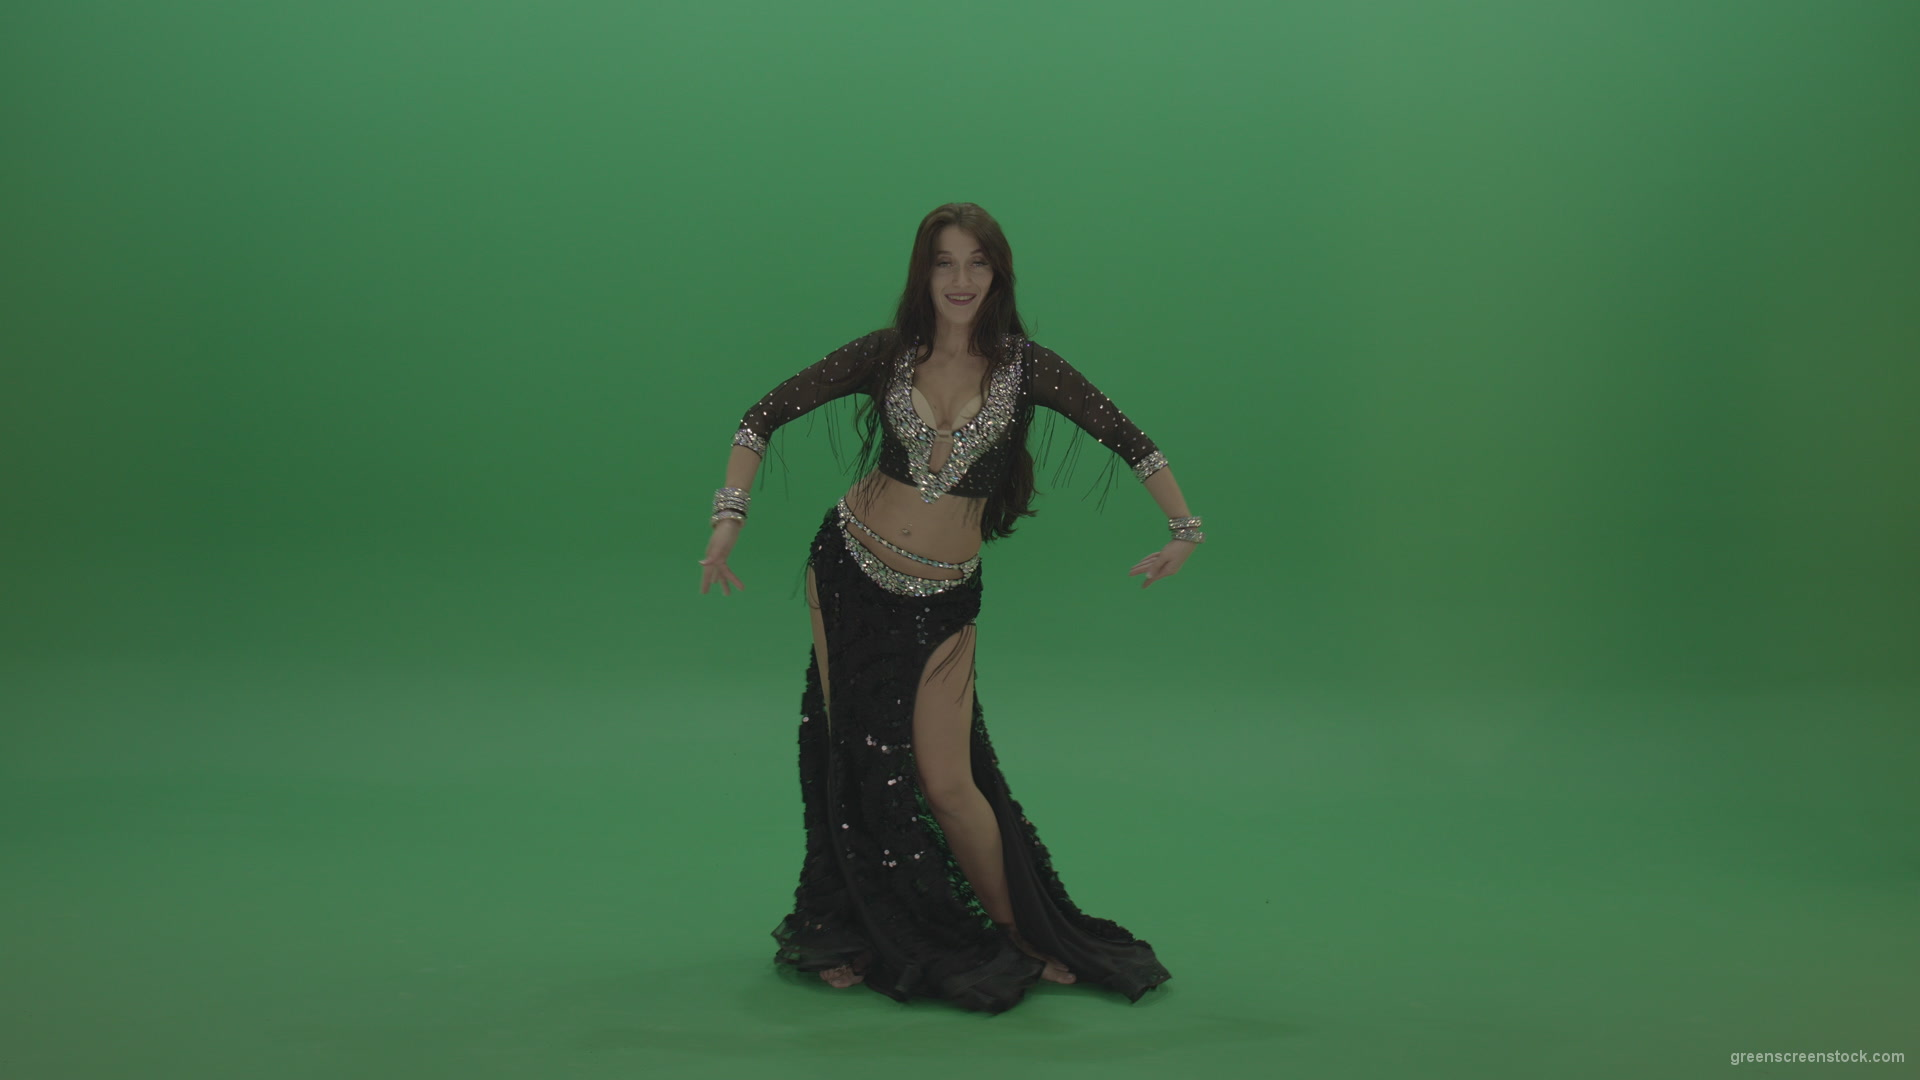 Adorable-belly-dancer-in-black-wear-display-amazing-dance-moves-over-chromakey-background_004 Green Screen Stock